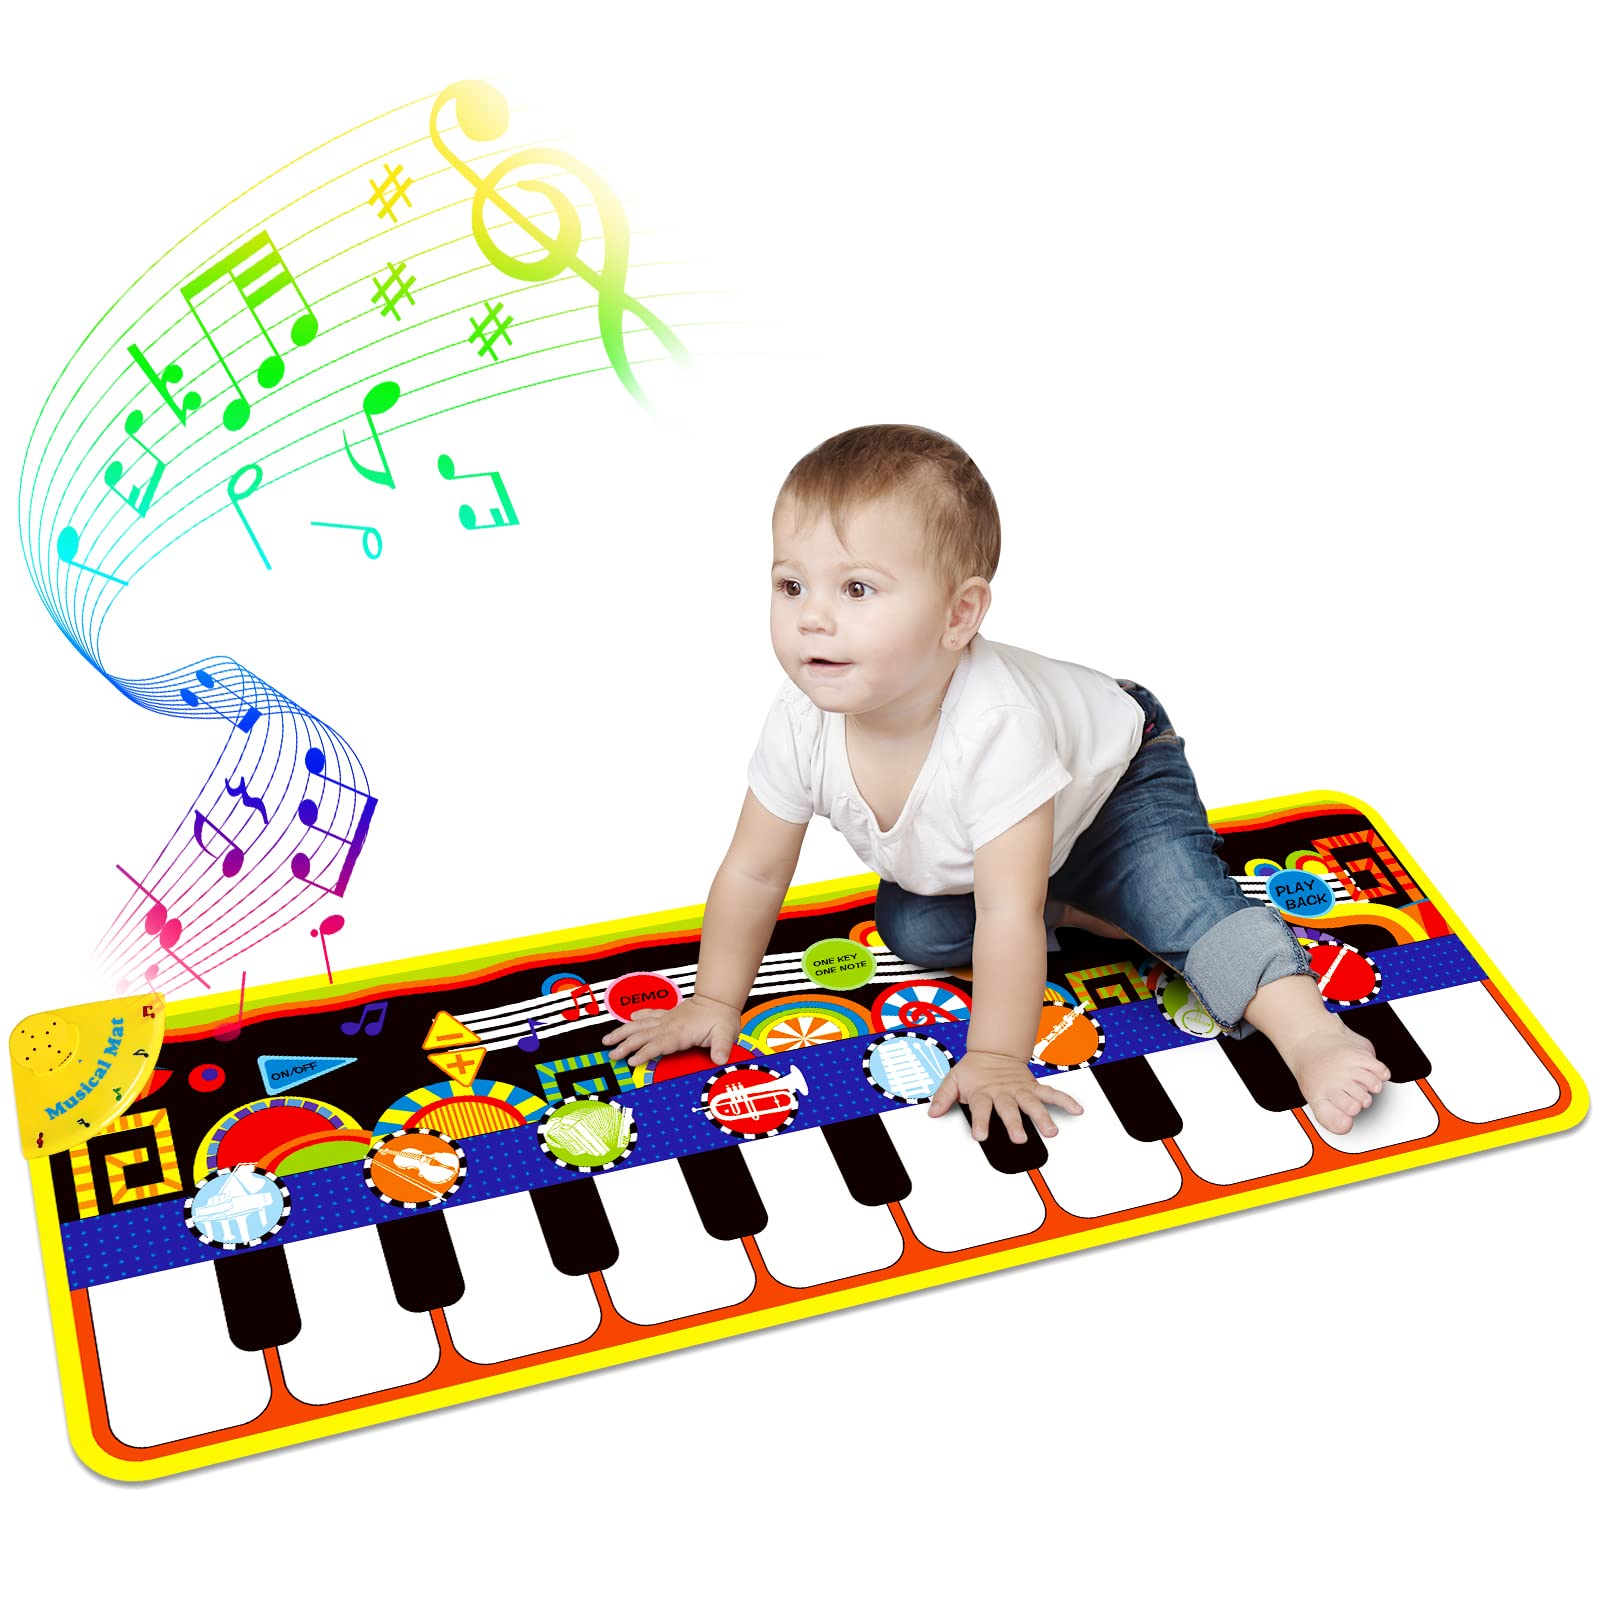 RenFox Baby Piano Mat with 25 Music Sounds, Kids Musical Playmat, Early Education Development Birthday Gift Music Toy for 1 2 3 Year Girls Boys, Piano Keyboard Touch Play Blanket for Child Toddlers